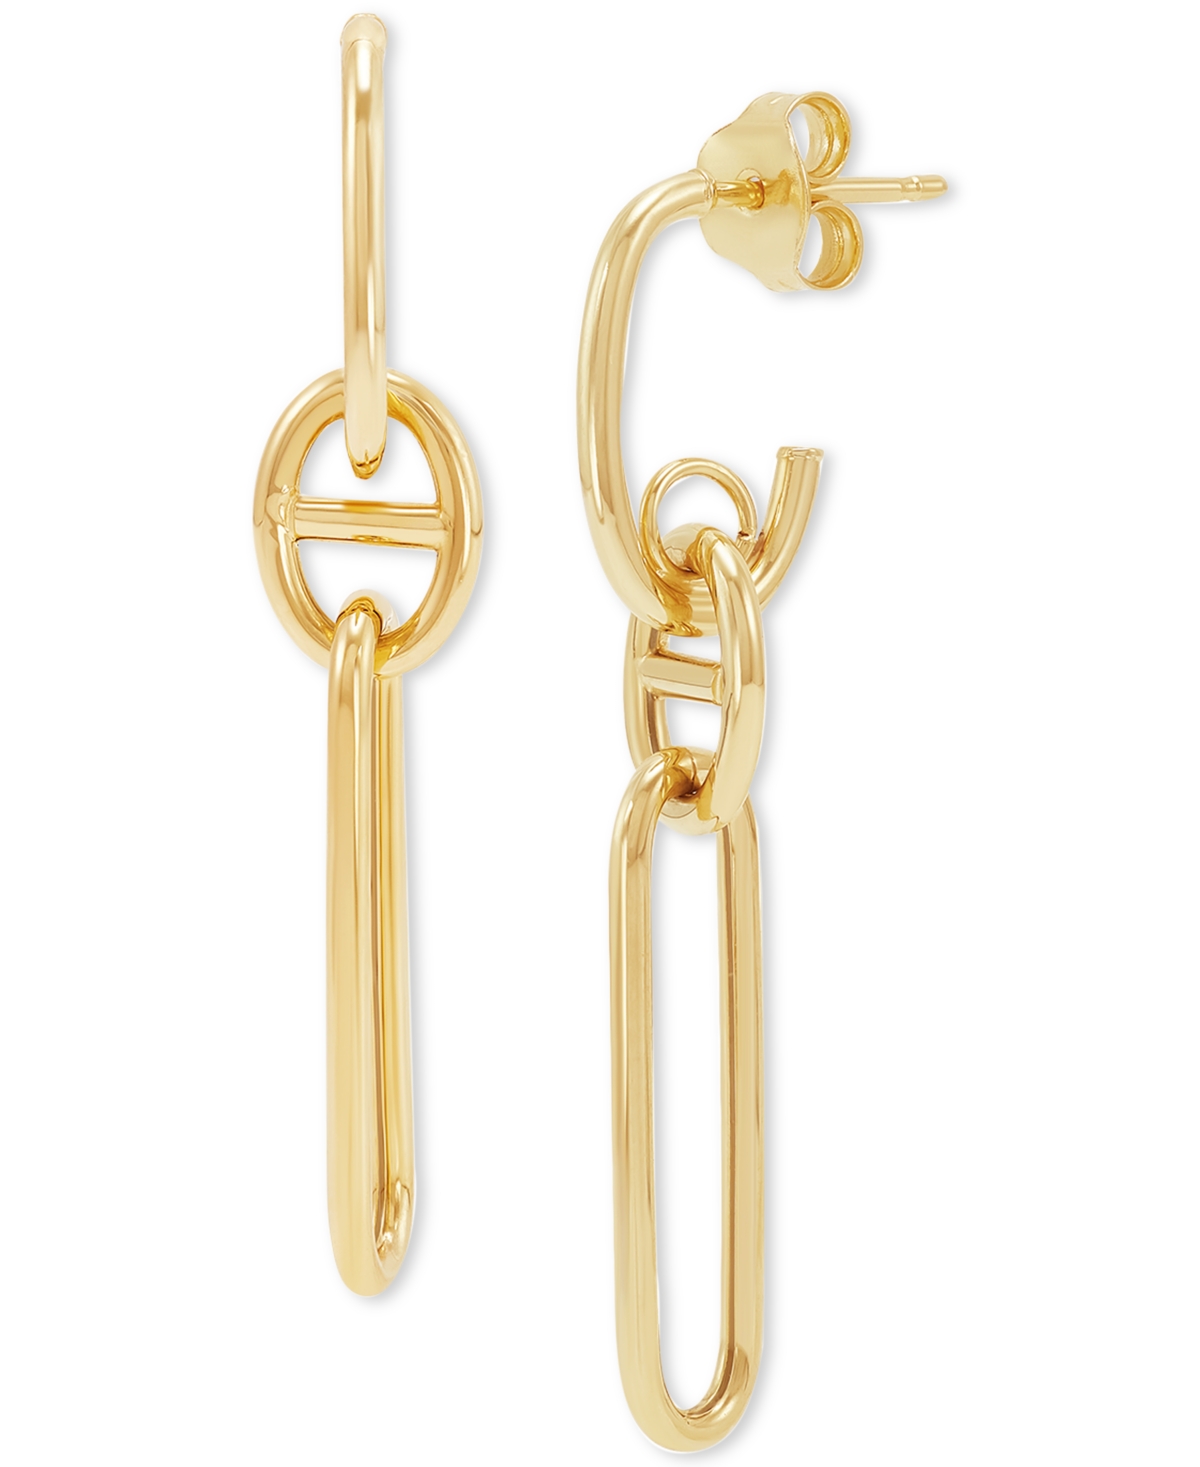 Polished Mariner & Paperclip Link Drop Earrings in 10k Gold - Gold